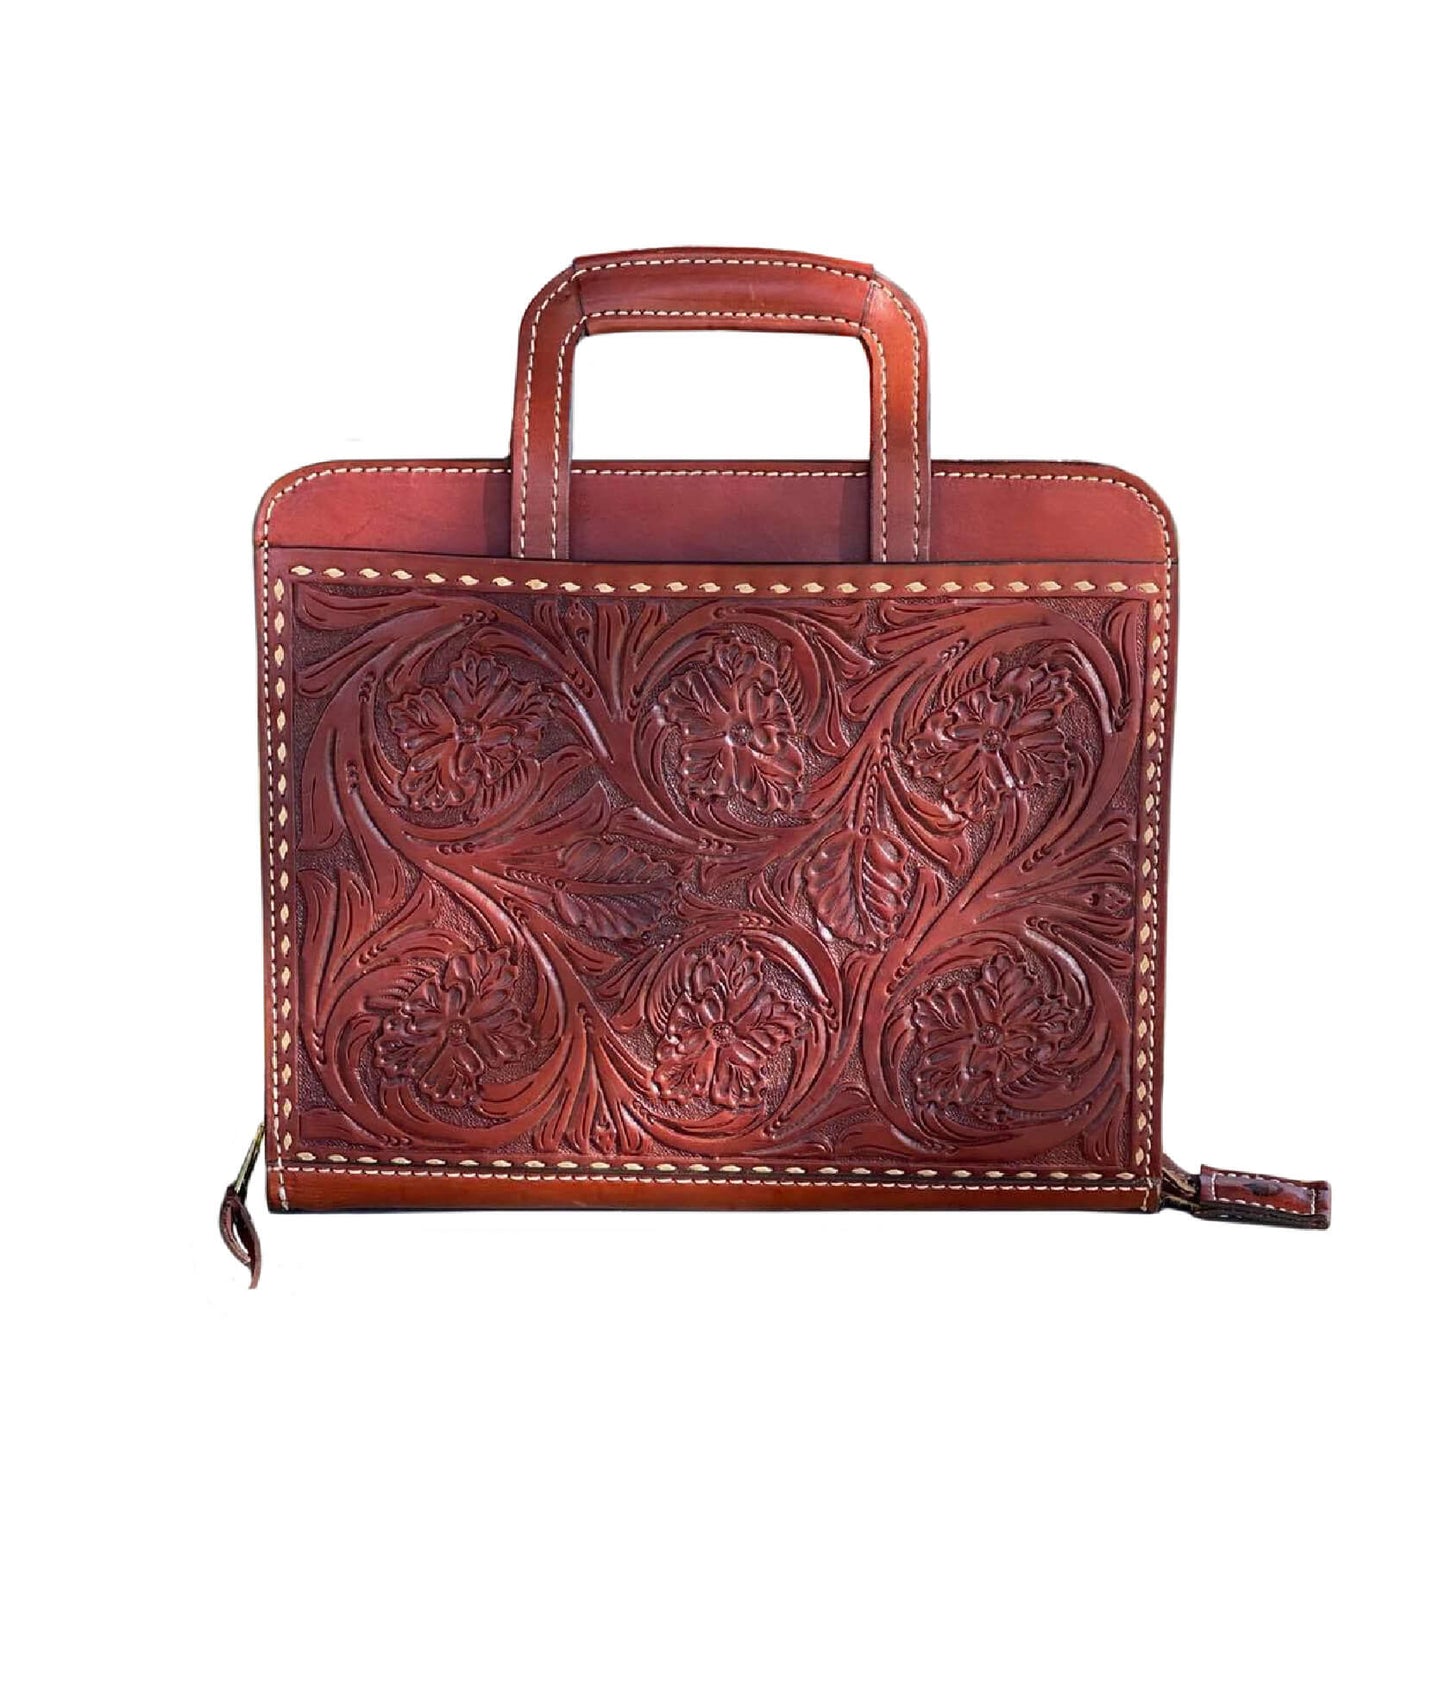 Cowboy Briefcase toast leather wild rose tooling with buckstitch